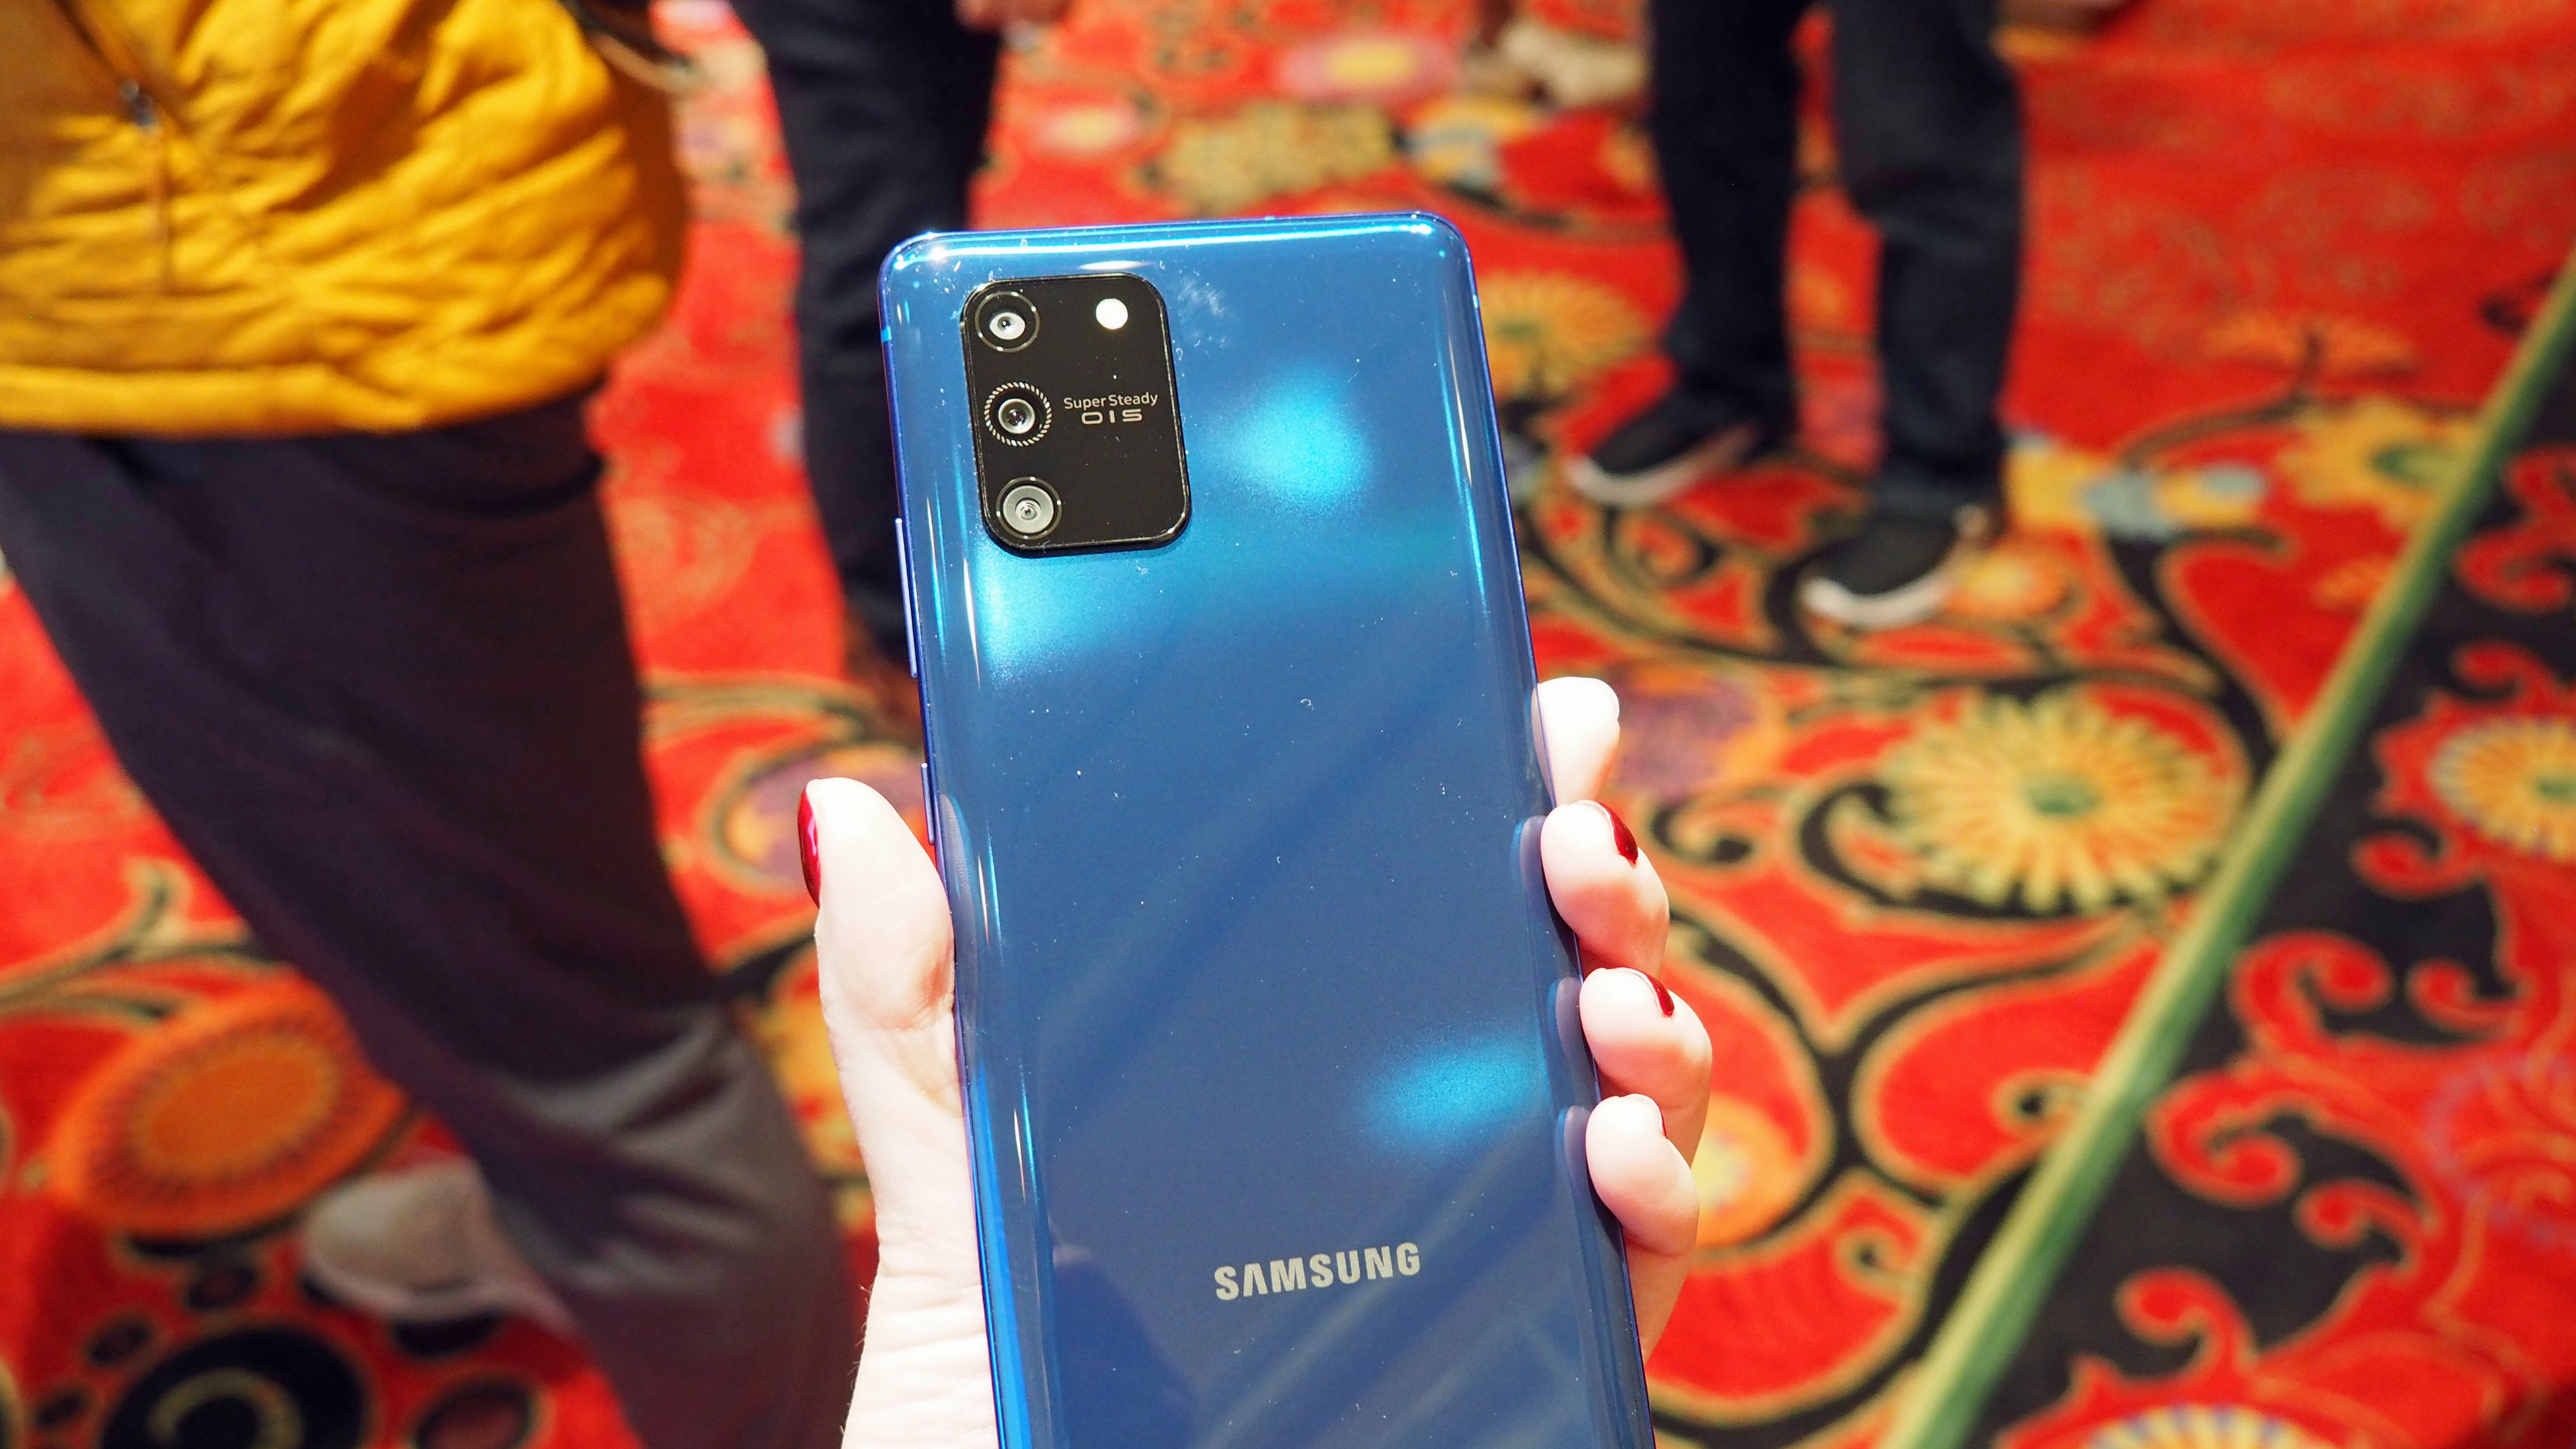 Samsung Galaxy S10 Lite review (hands on) | Tom's Guide